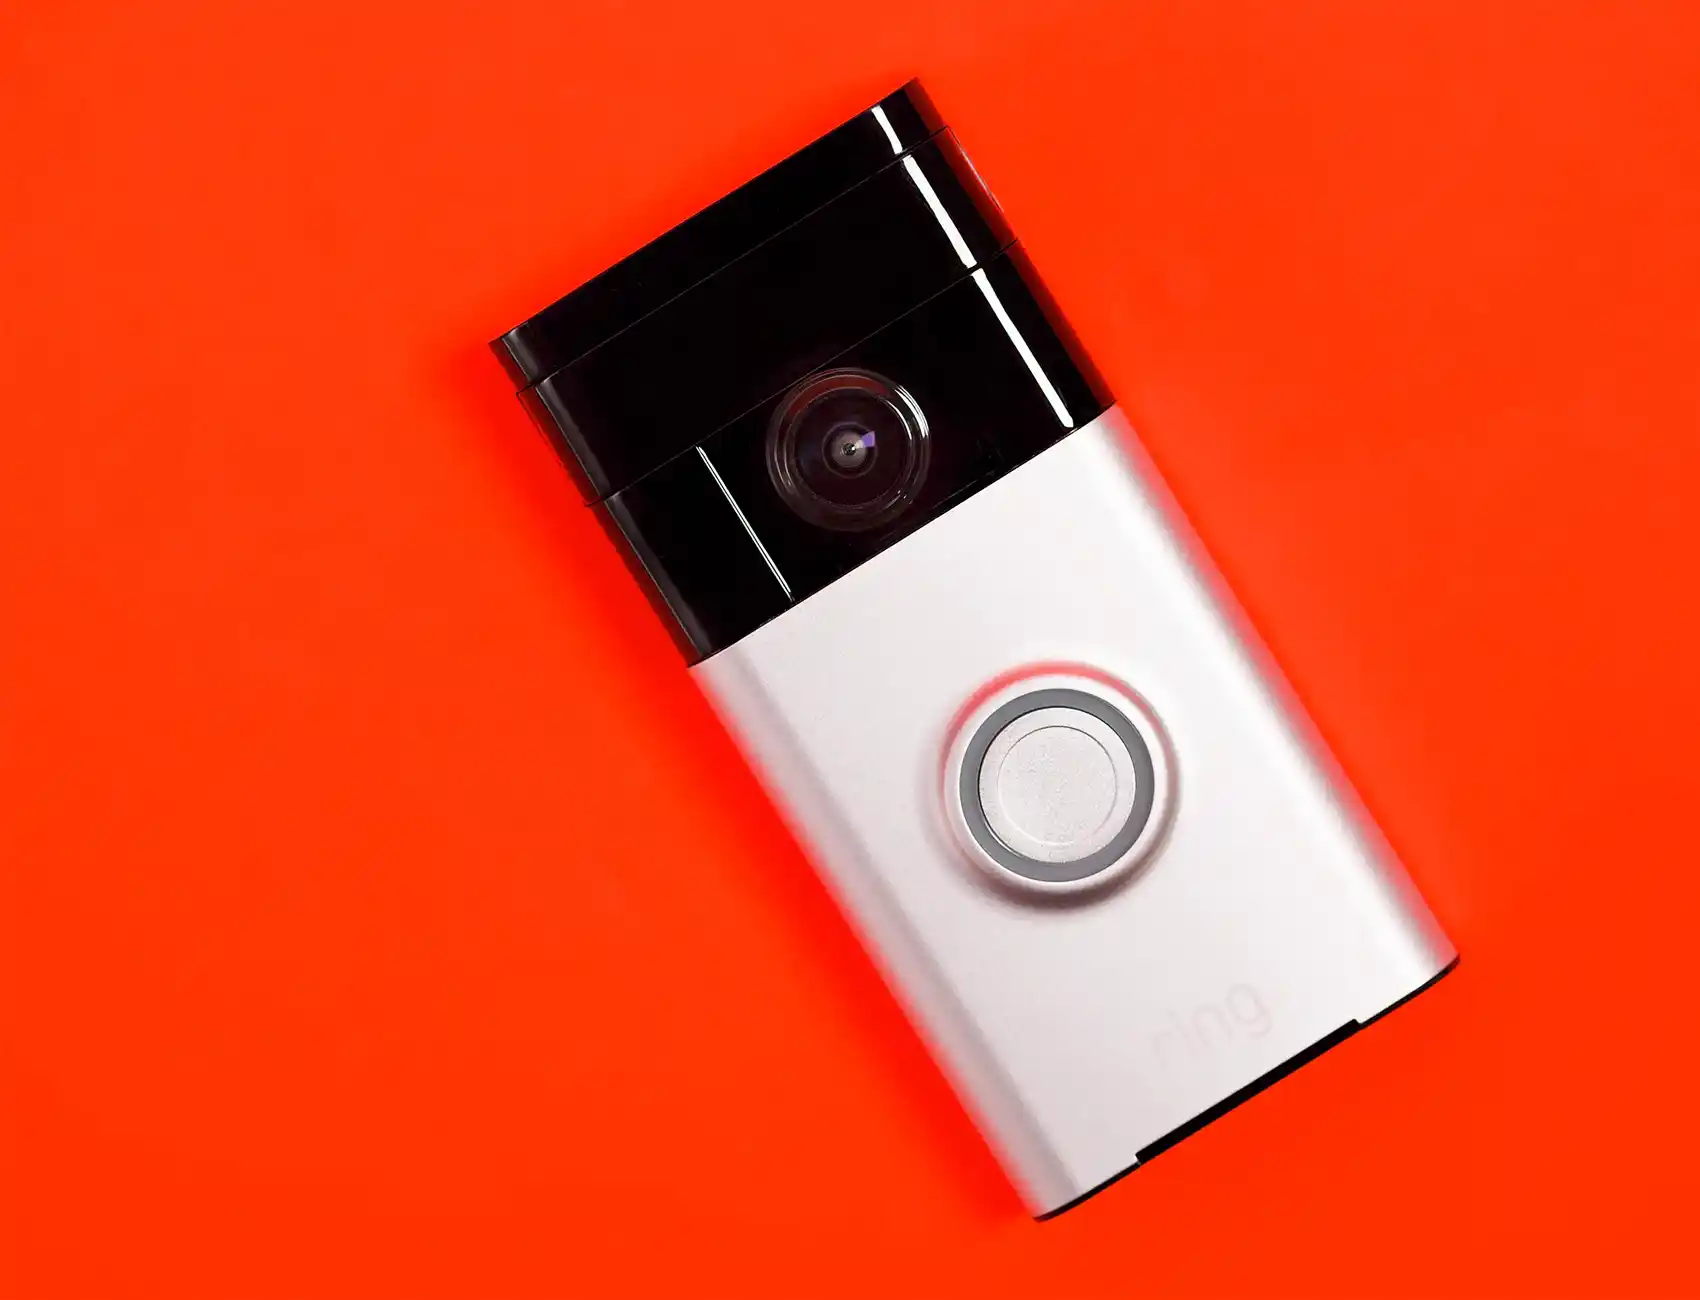 Ring Doorbell on a red background 1.0